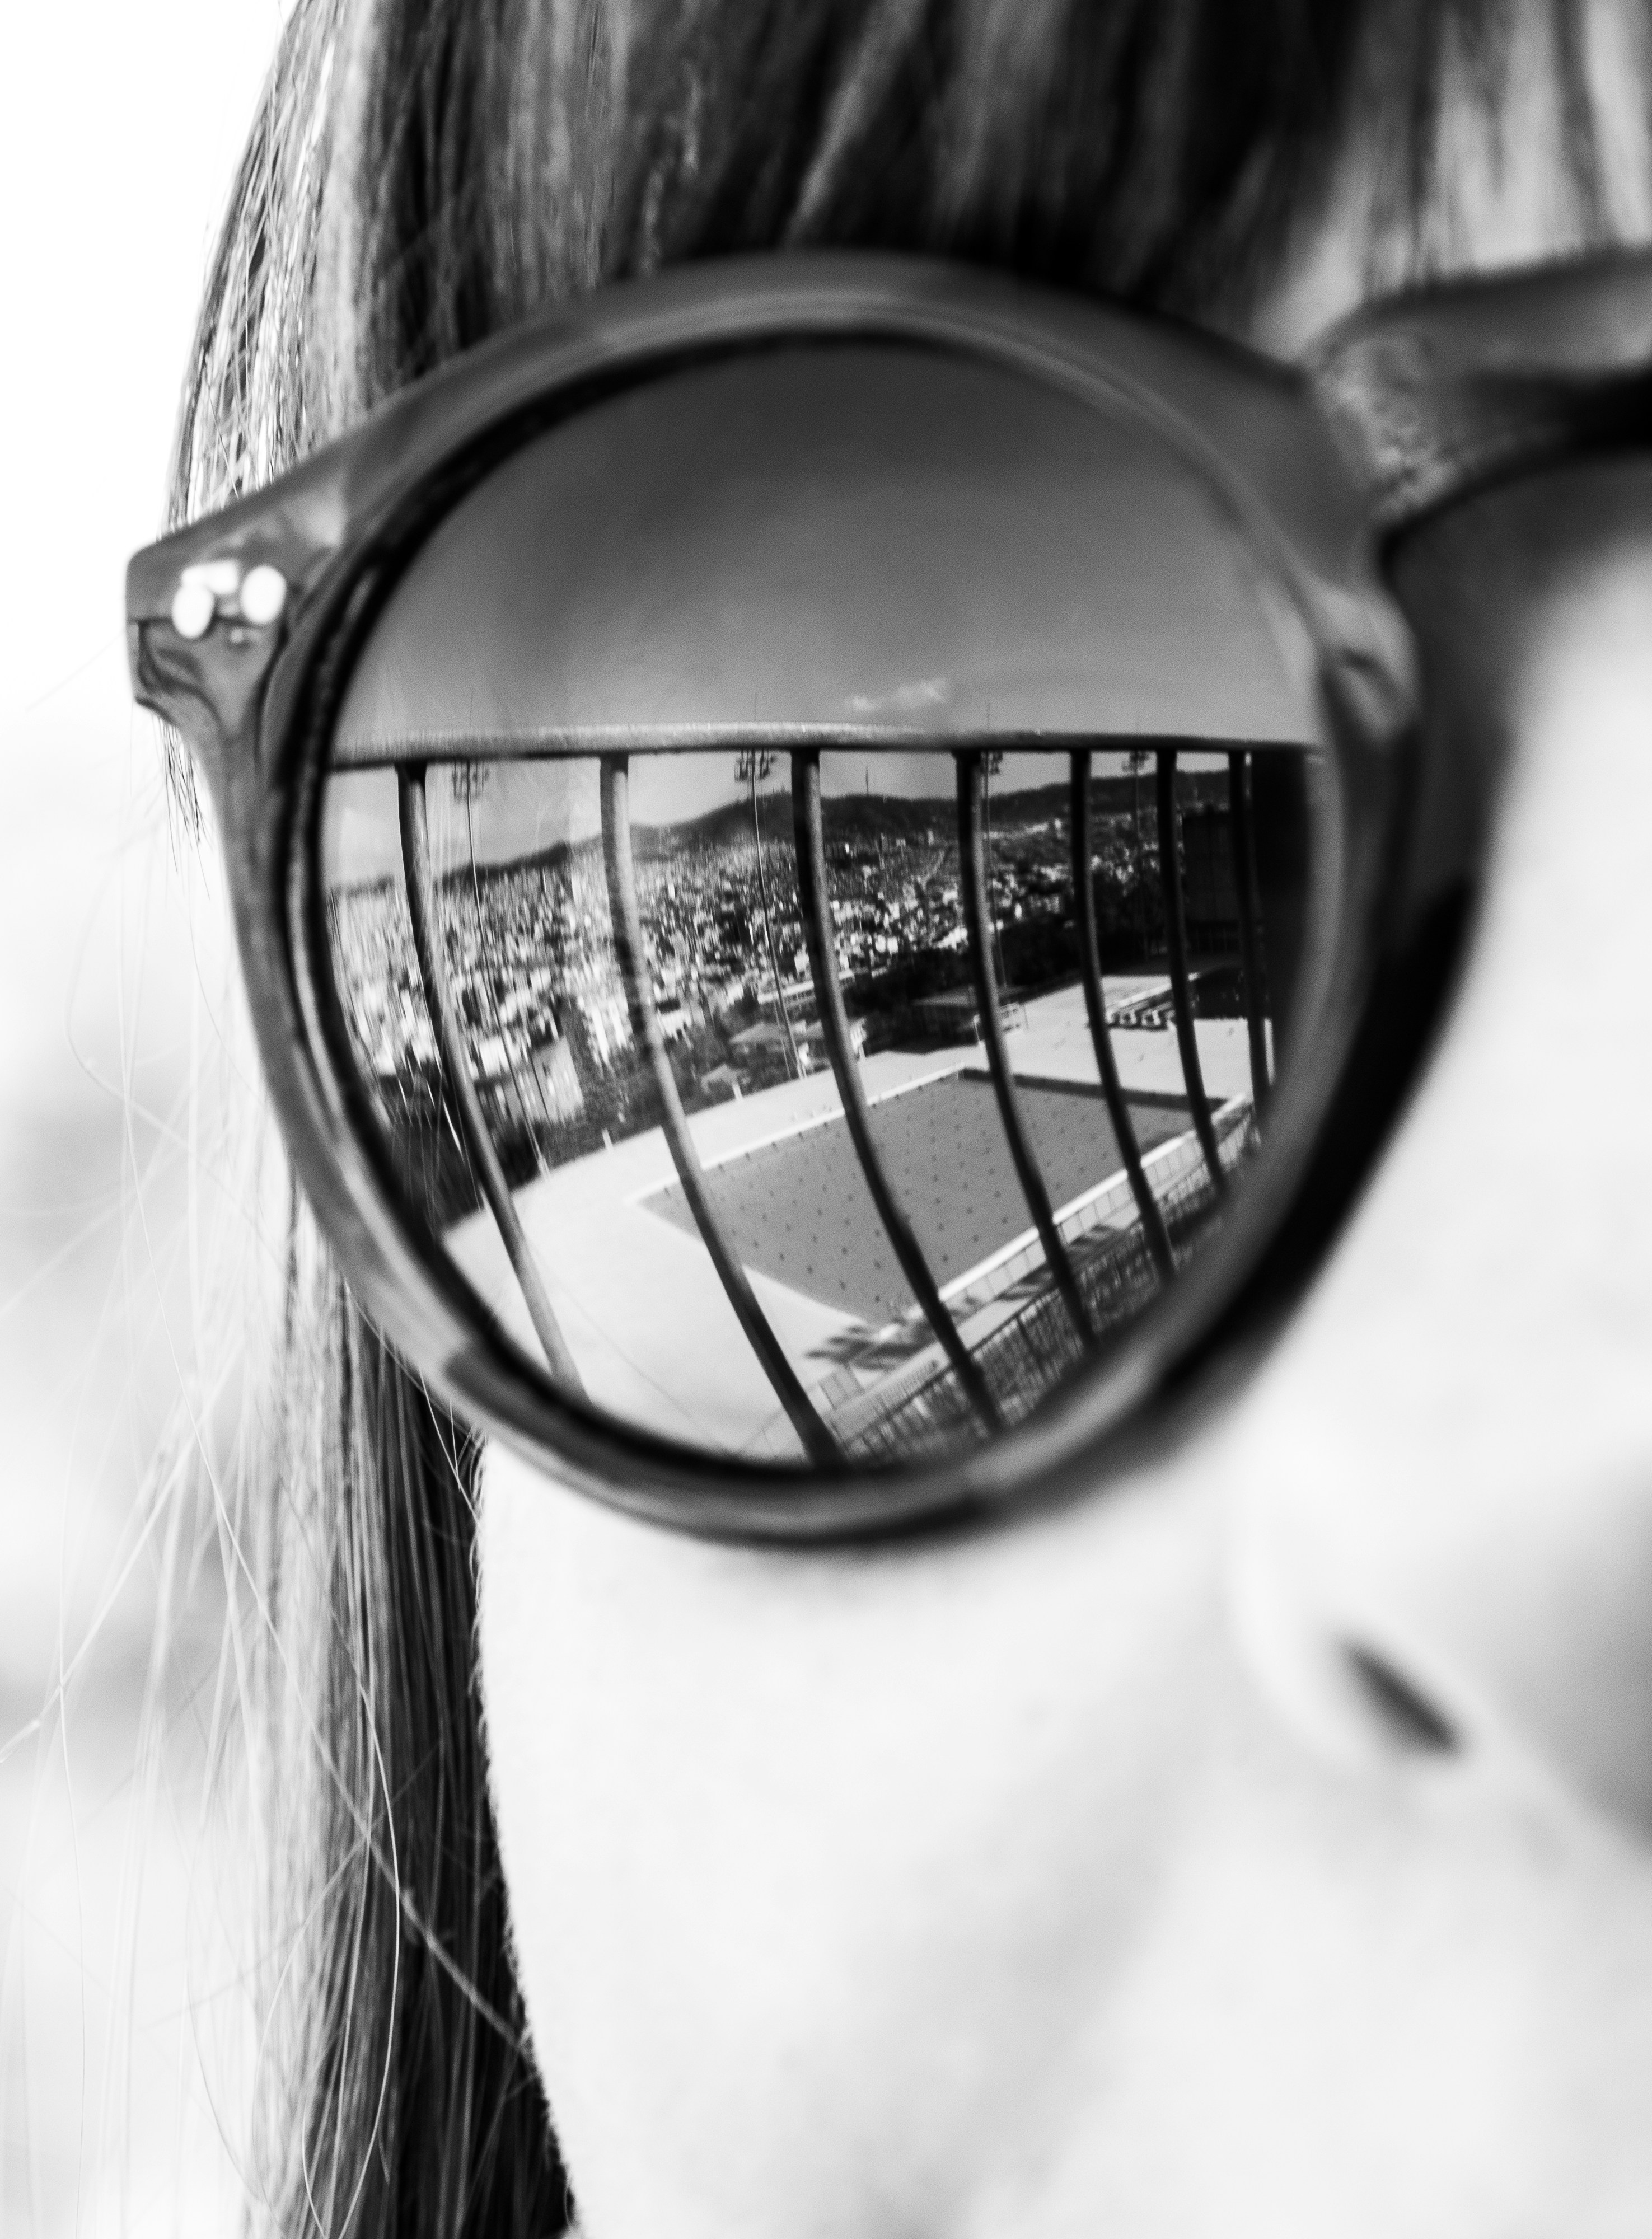 The swimming pool, used for the 1992 Barcelona Olympics, reflects in a girl's sunglasses.